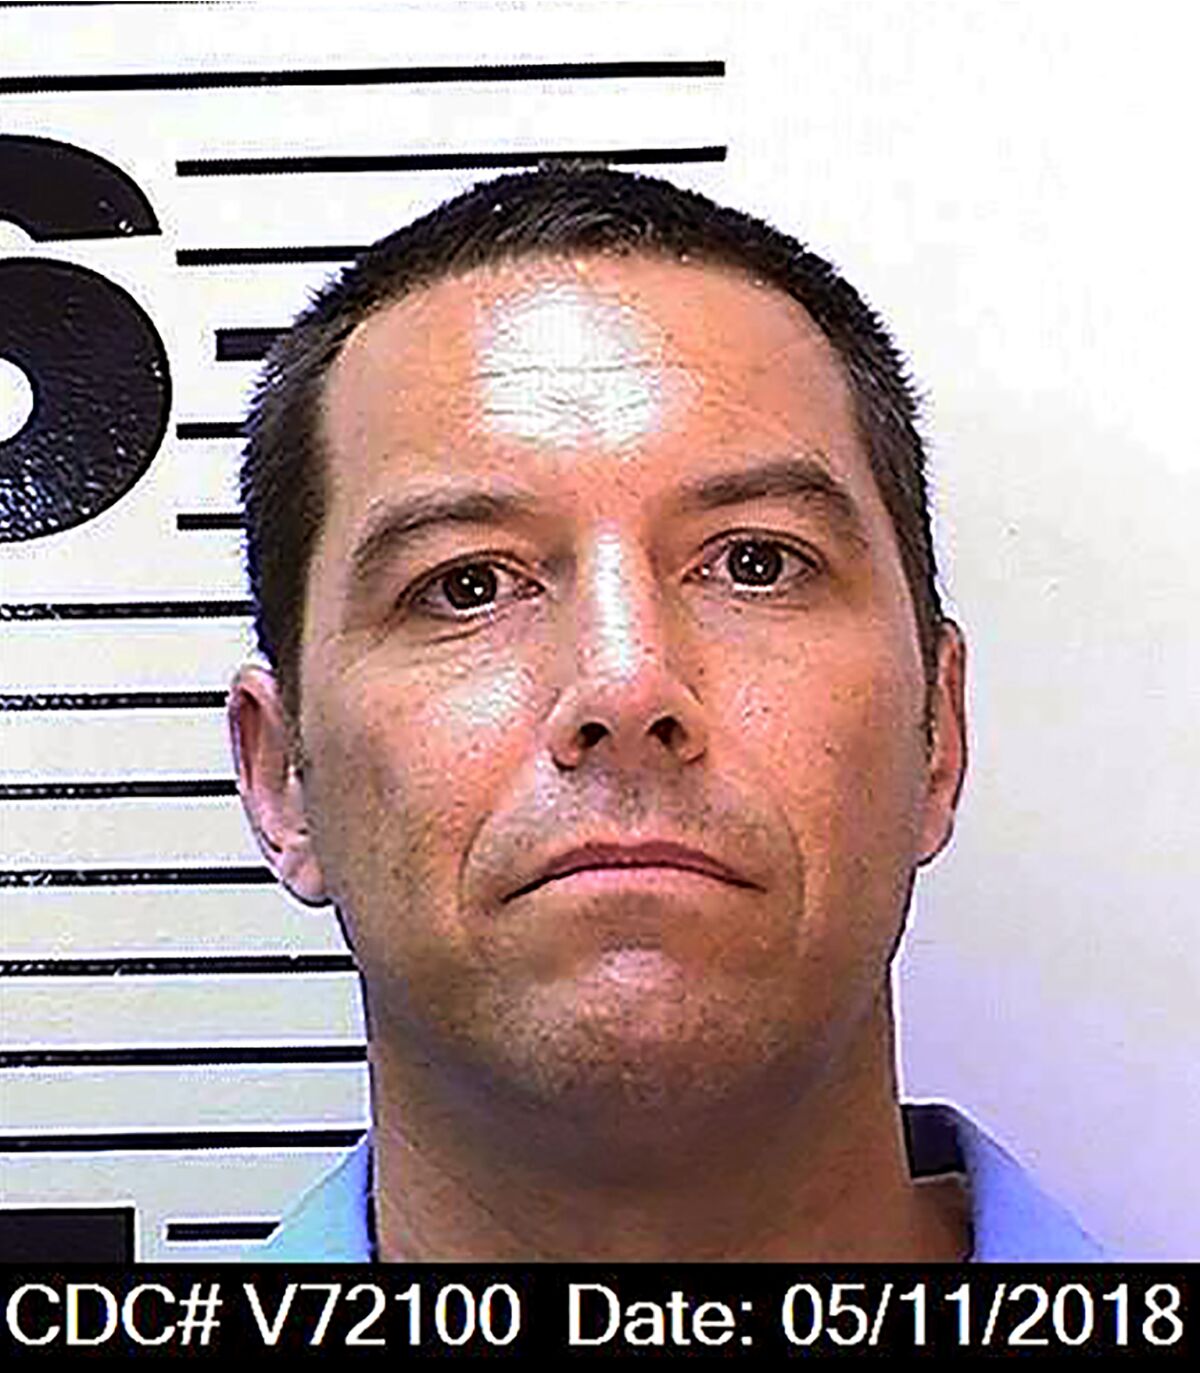 FILE - This May 11, 2018, file photo, provided by the California Department of Corrections and Rehabilitation shows Scott Peterson. California prosecutors said Tuesday, June 1, 2021, that they won't again seek the death penalty against Sctt Peterson in the 2002 slaying of his pregnant wife even if he is granted a new trial based on juror misconduct. (California Department of Corrections and Rehabilitation via AP, File)